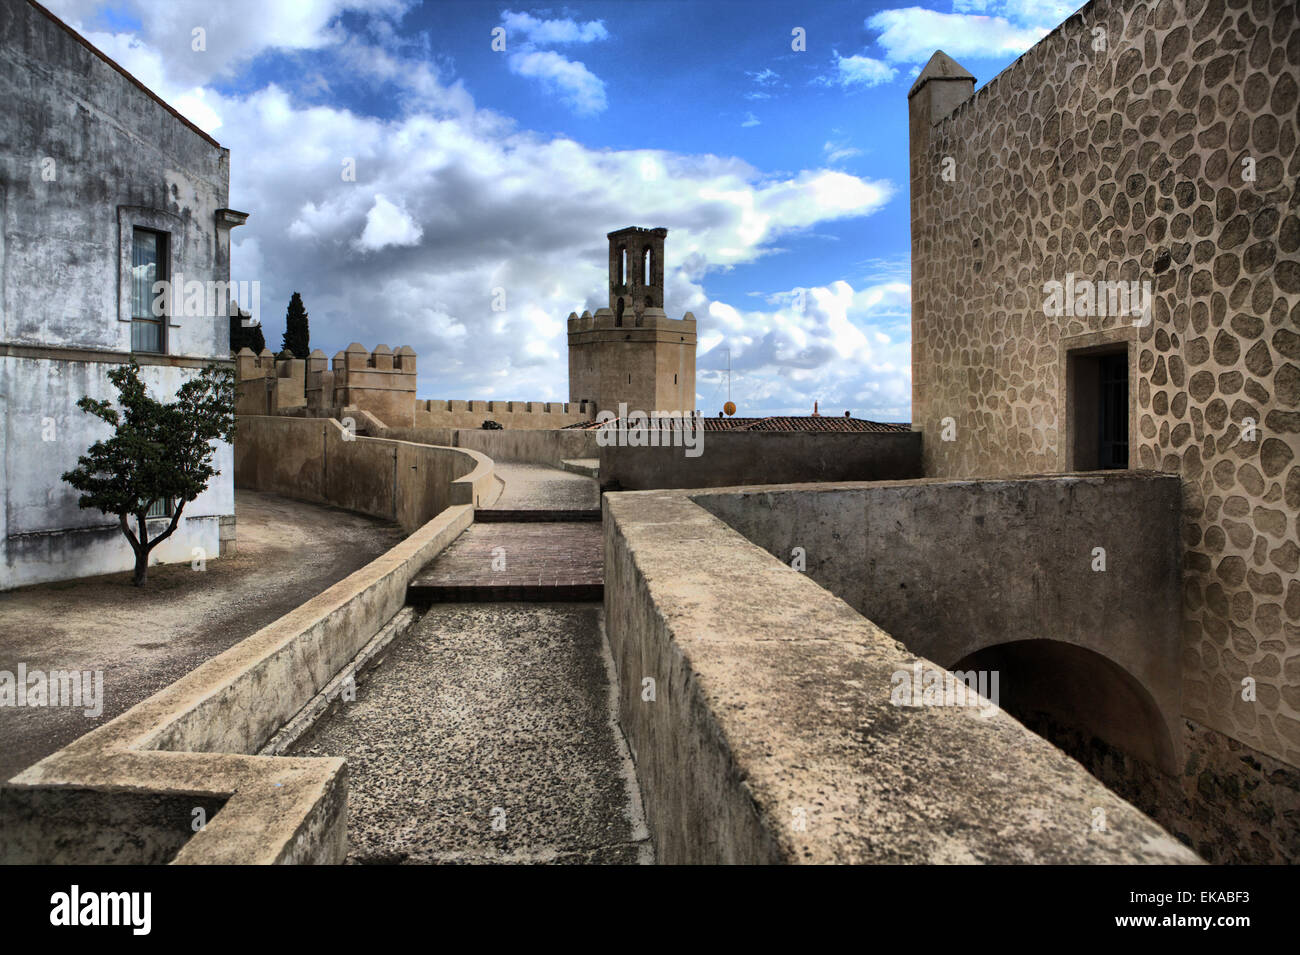 Battlements, pathways and towers of Badajoz muslim wall. Adarve and inside buildings. HDR Stock Photo